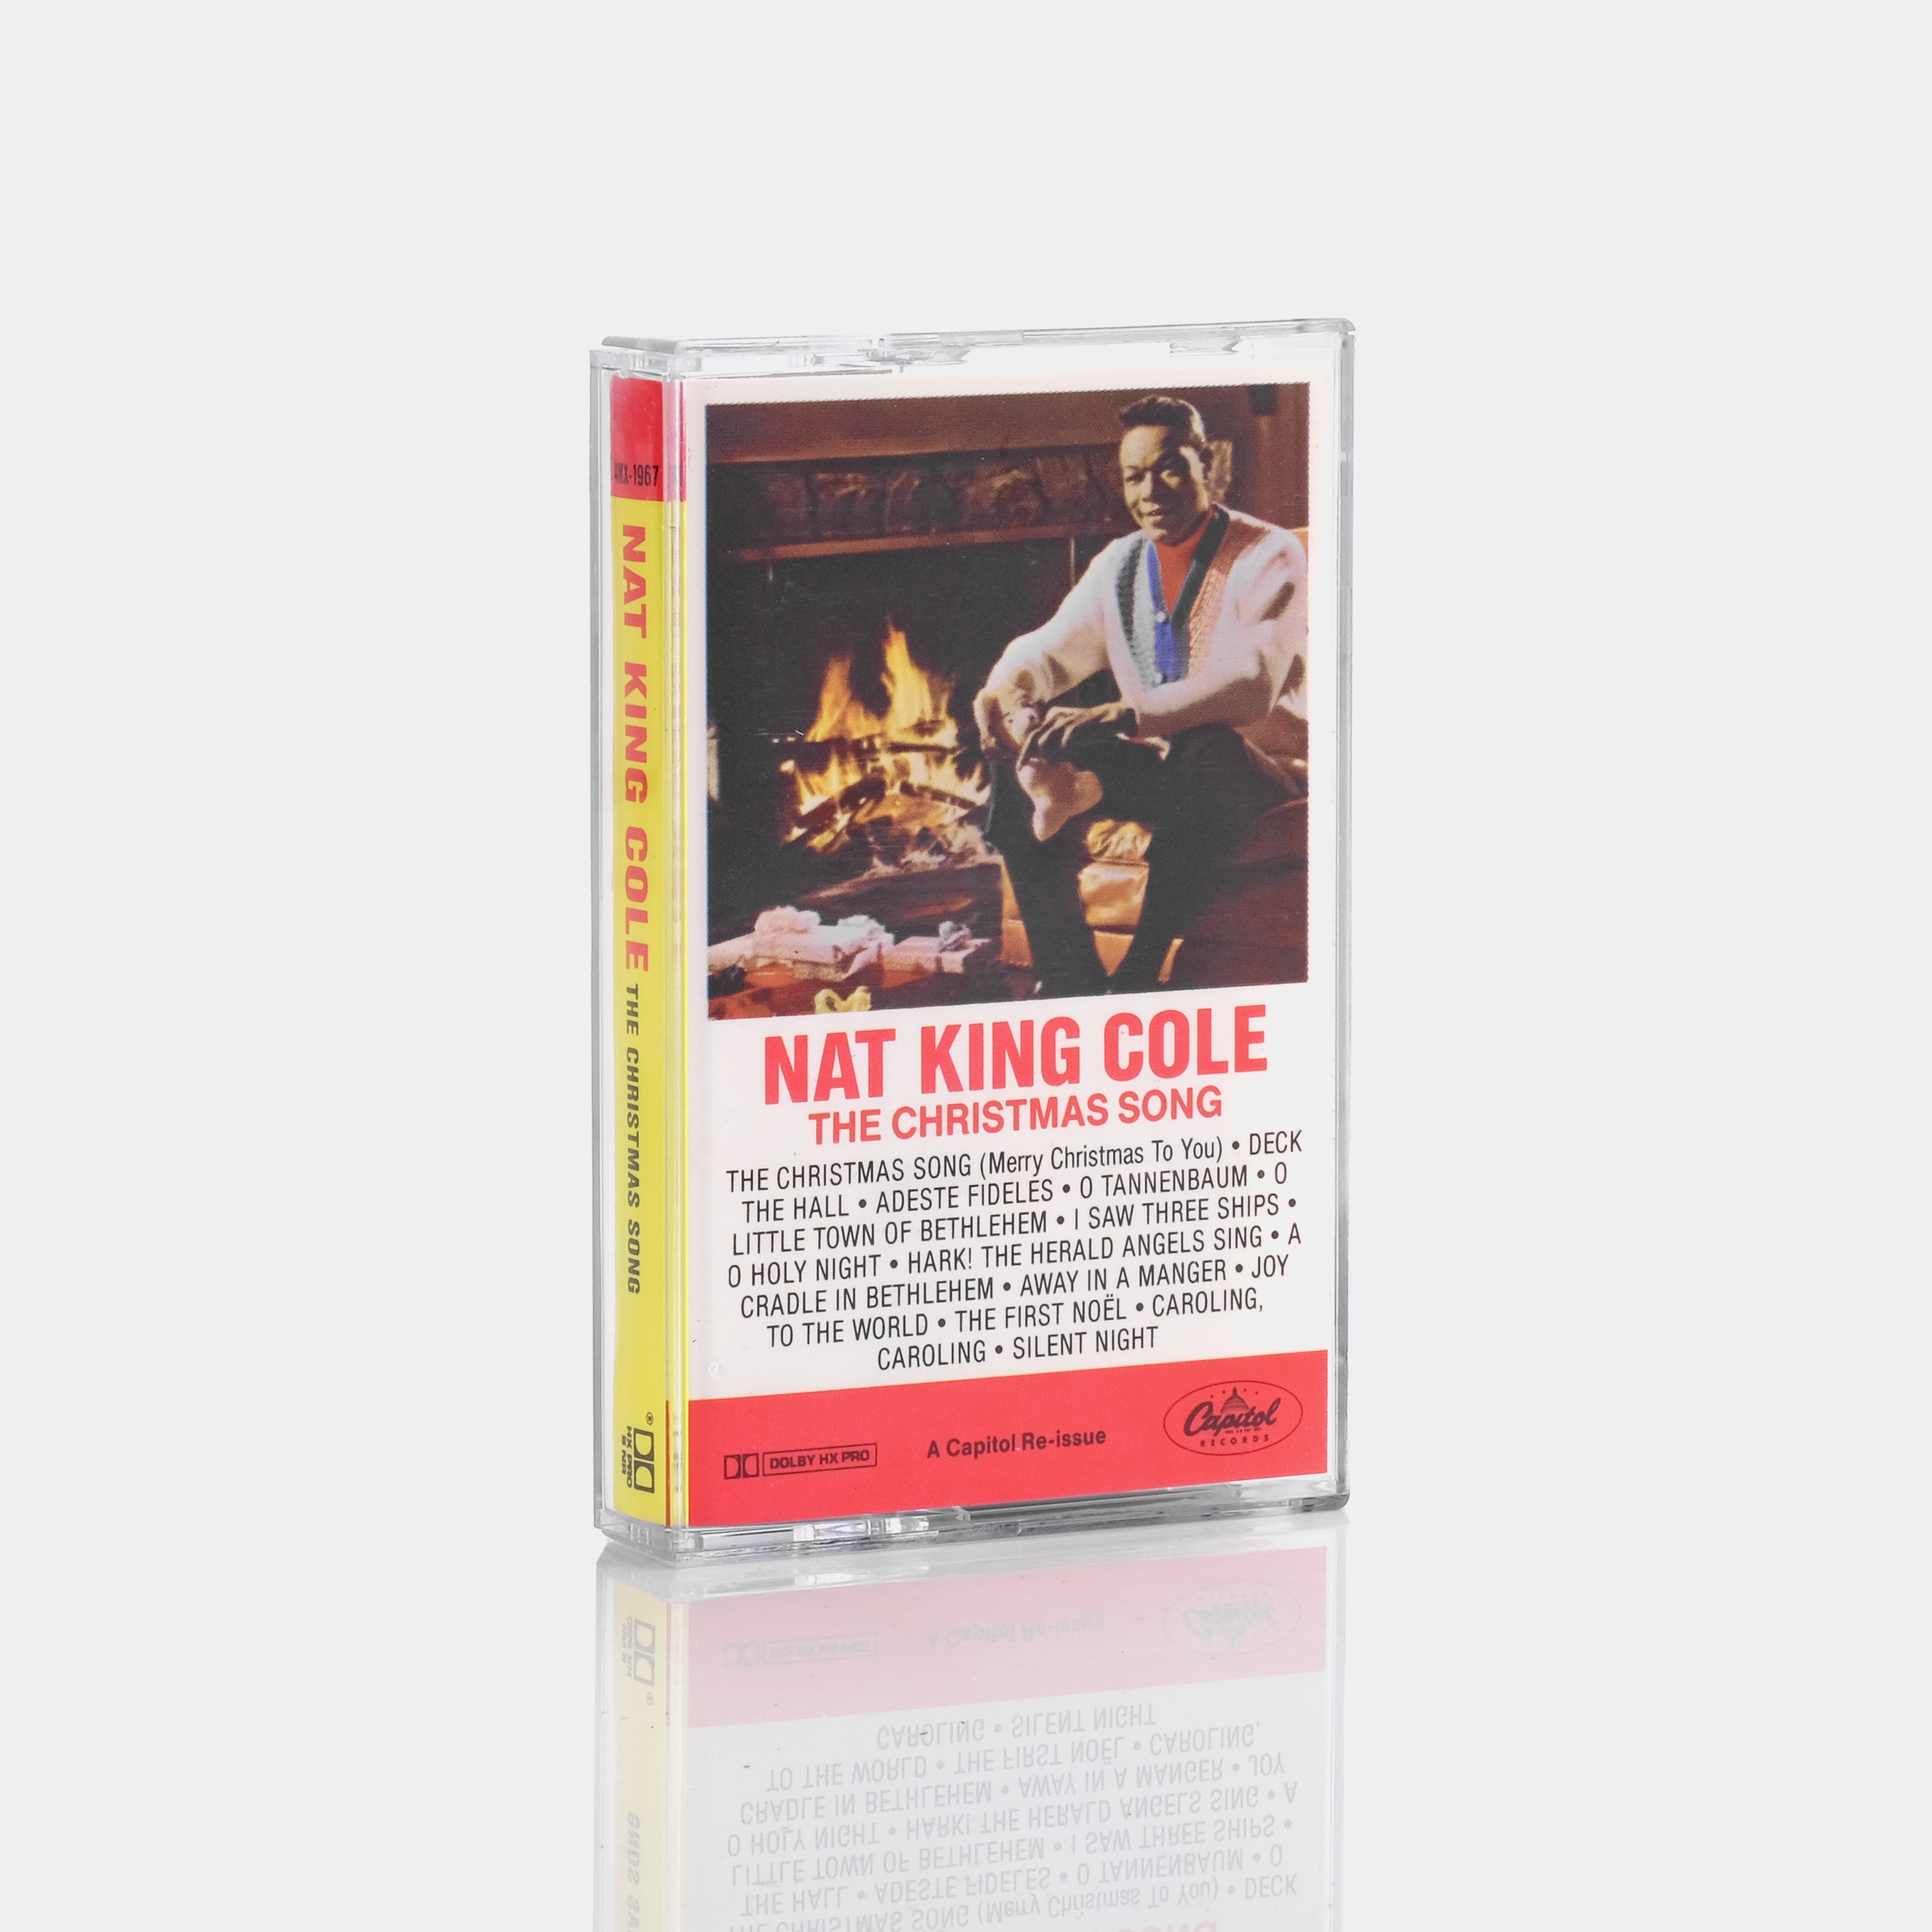 Nat King Cole - The Christmas Song Cassette Tape